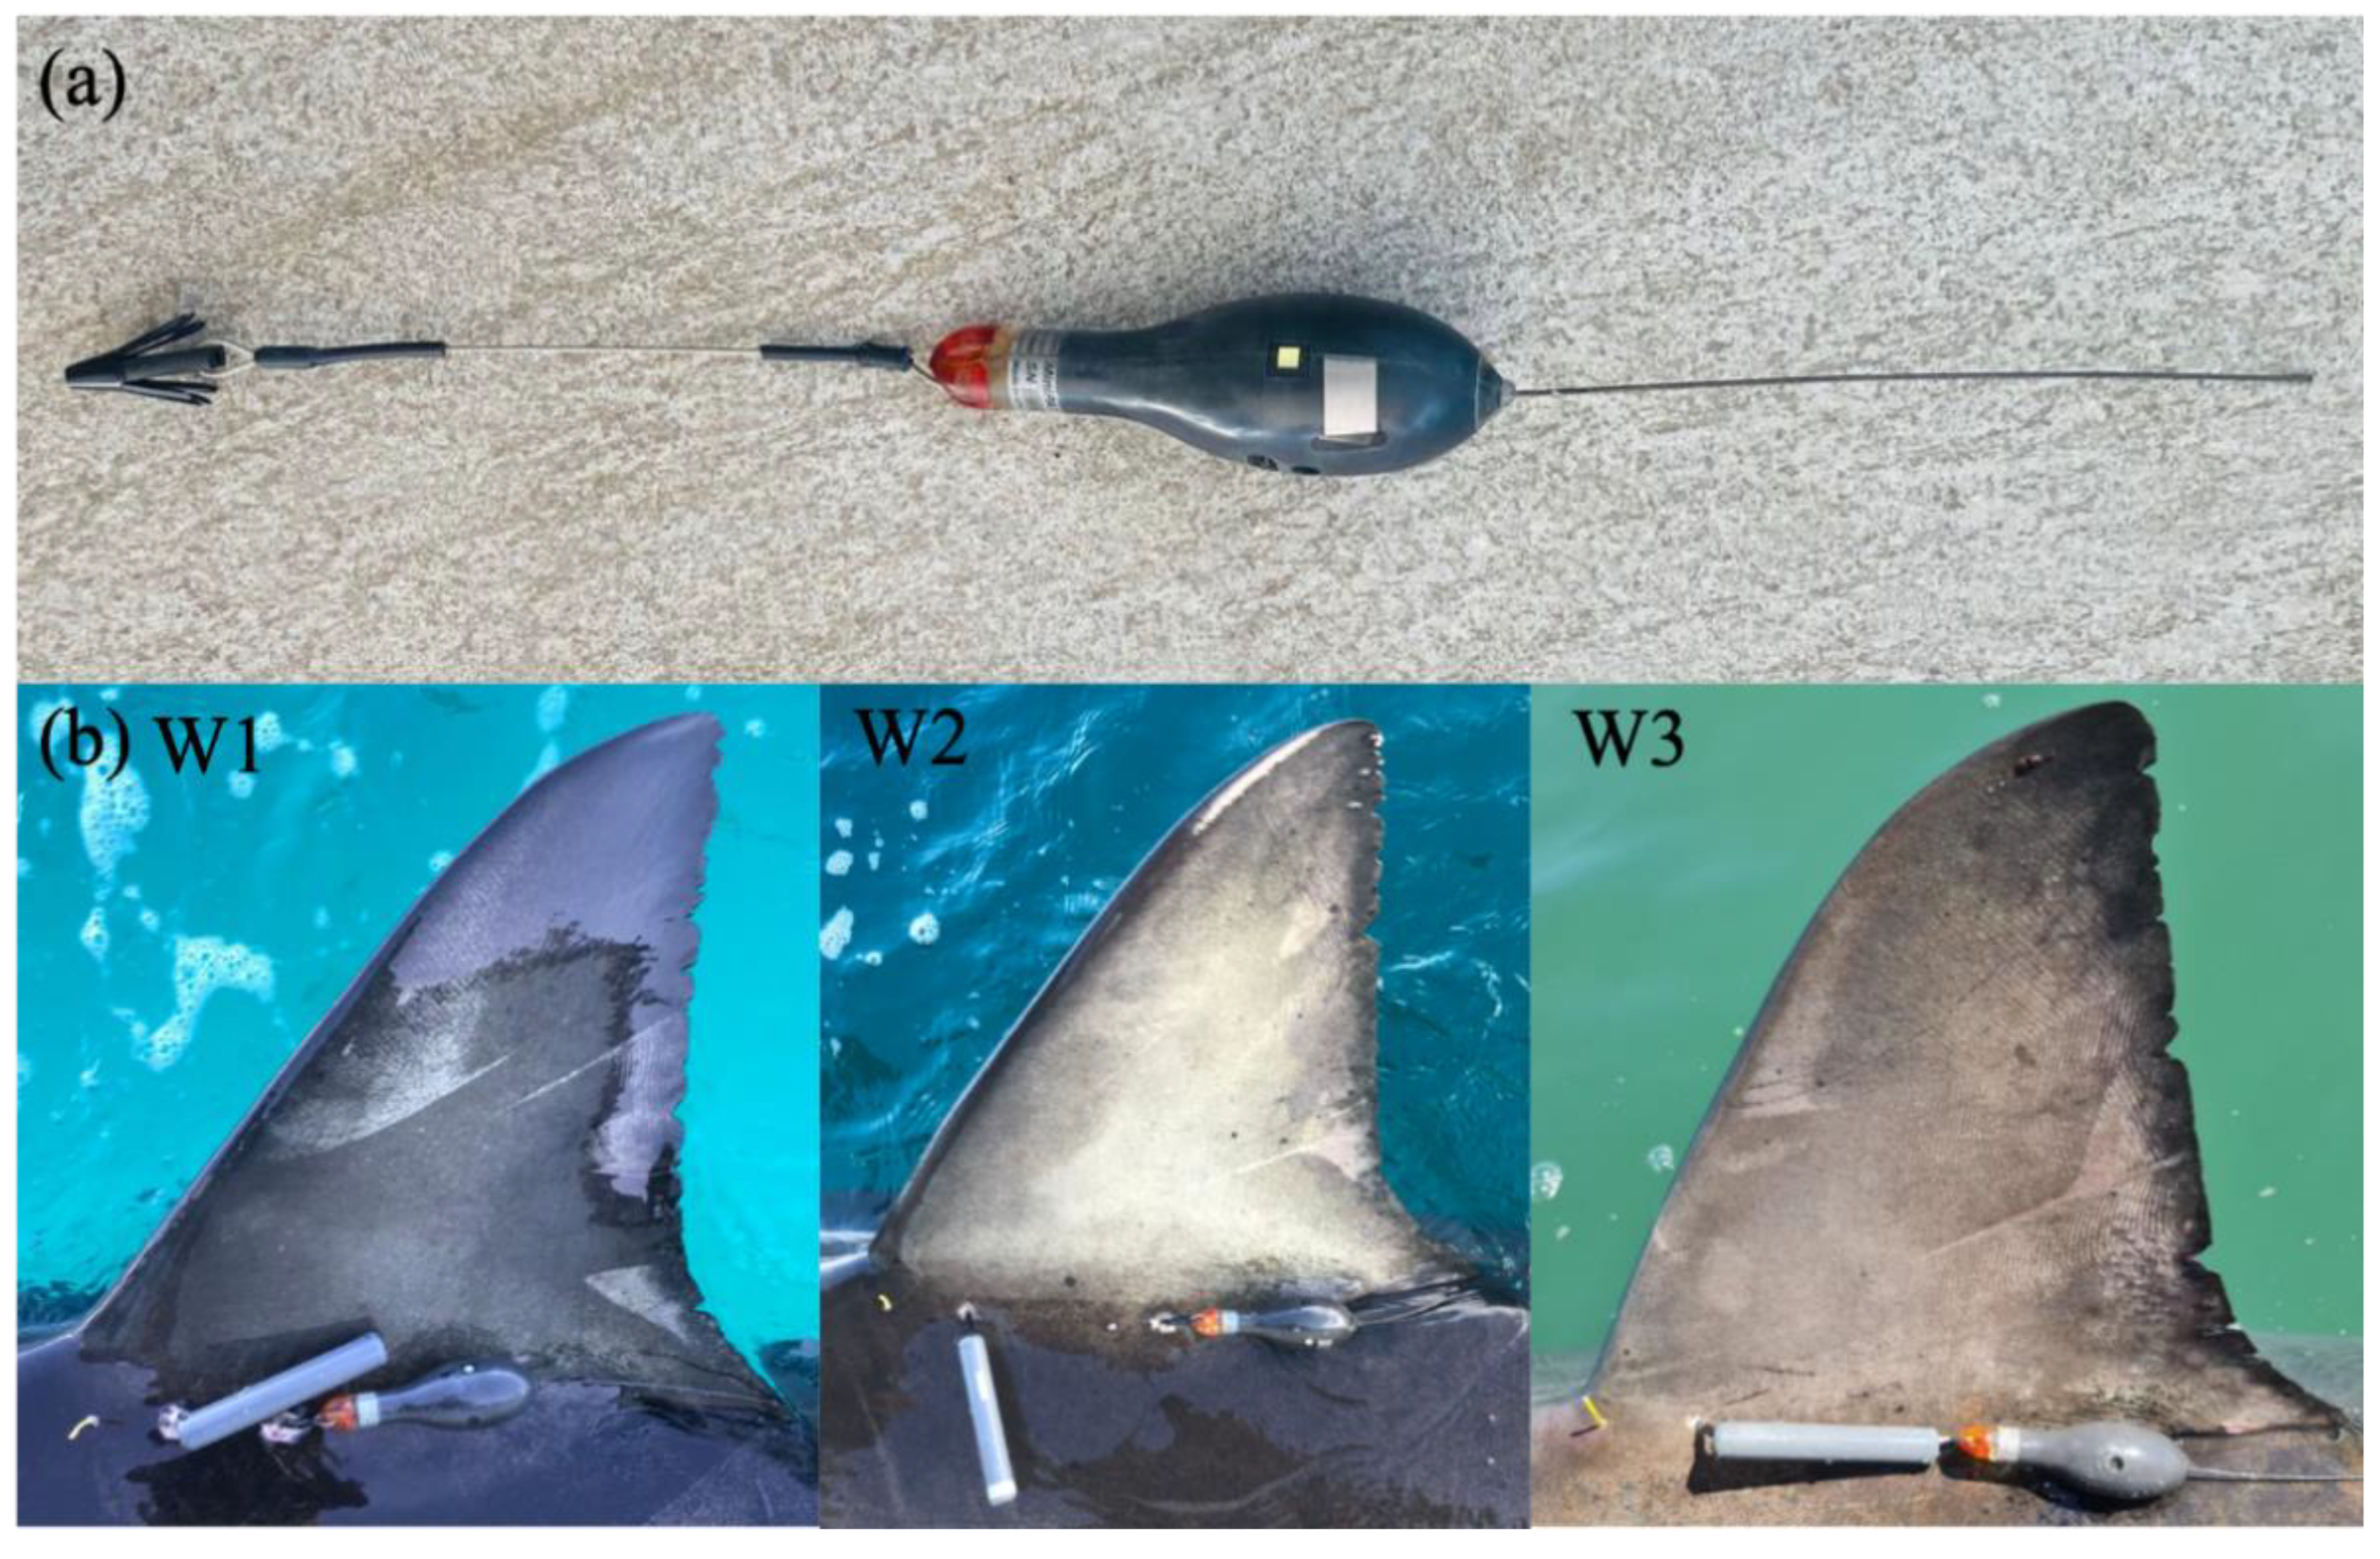 Red muscle (RM) distribution patterns in five shark species. Sharks